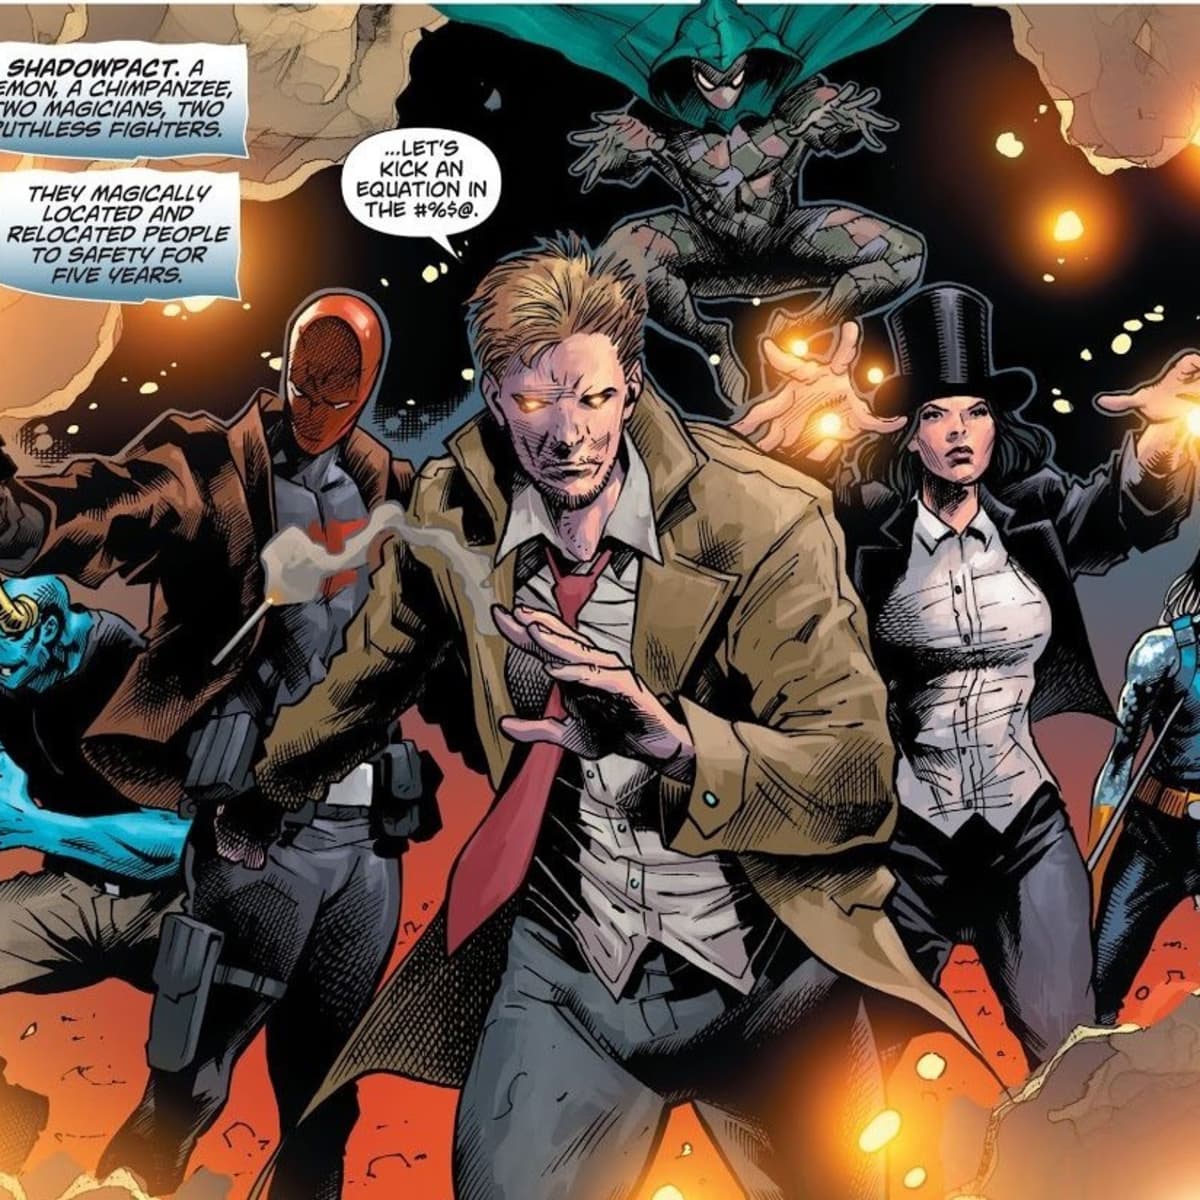 Magical Items collected by John Constantine to Kill Trigon - HubPages